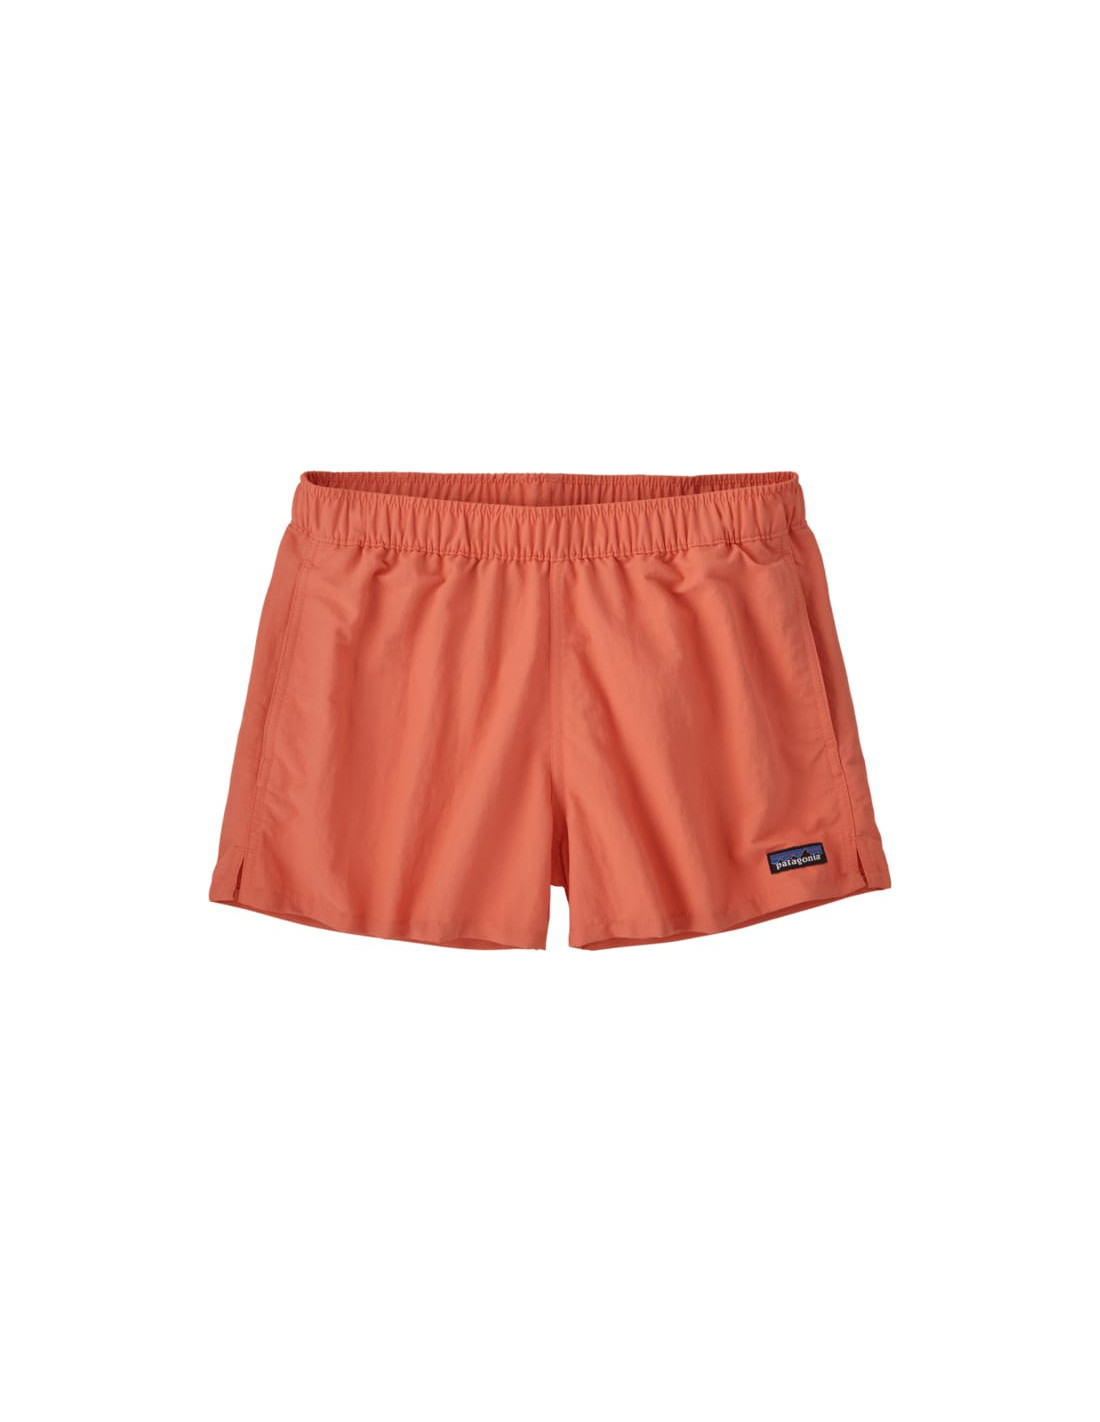 W'S BARELY BAGGIES SHORTS - 2 12 IN.